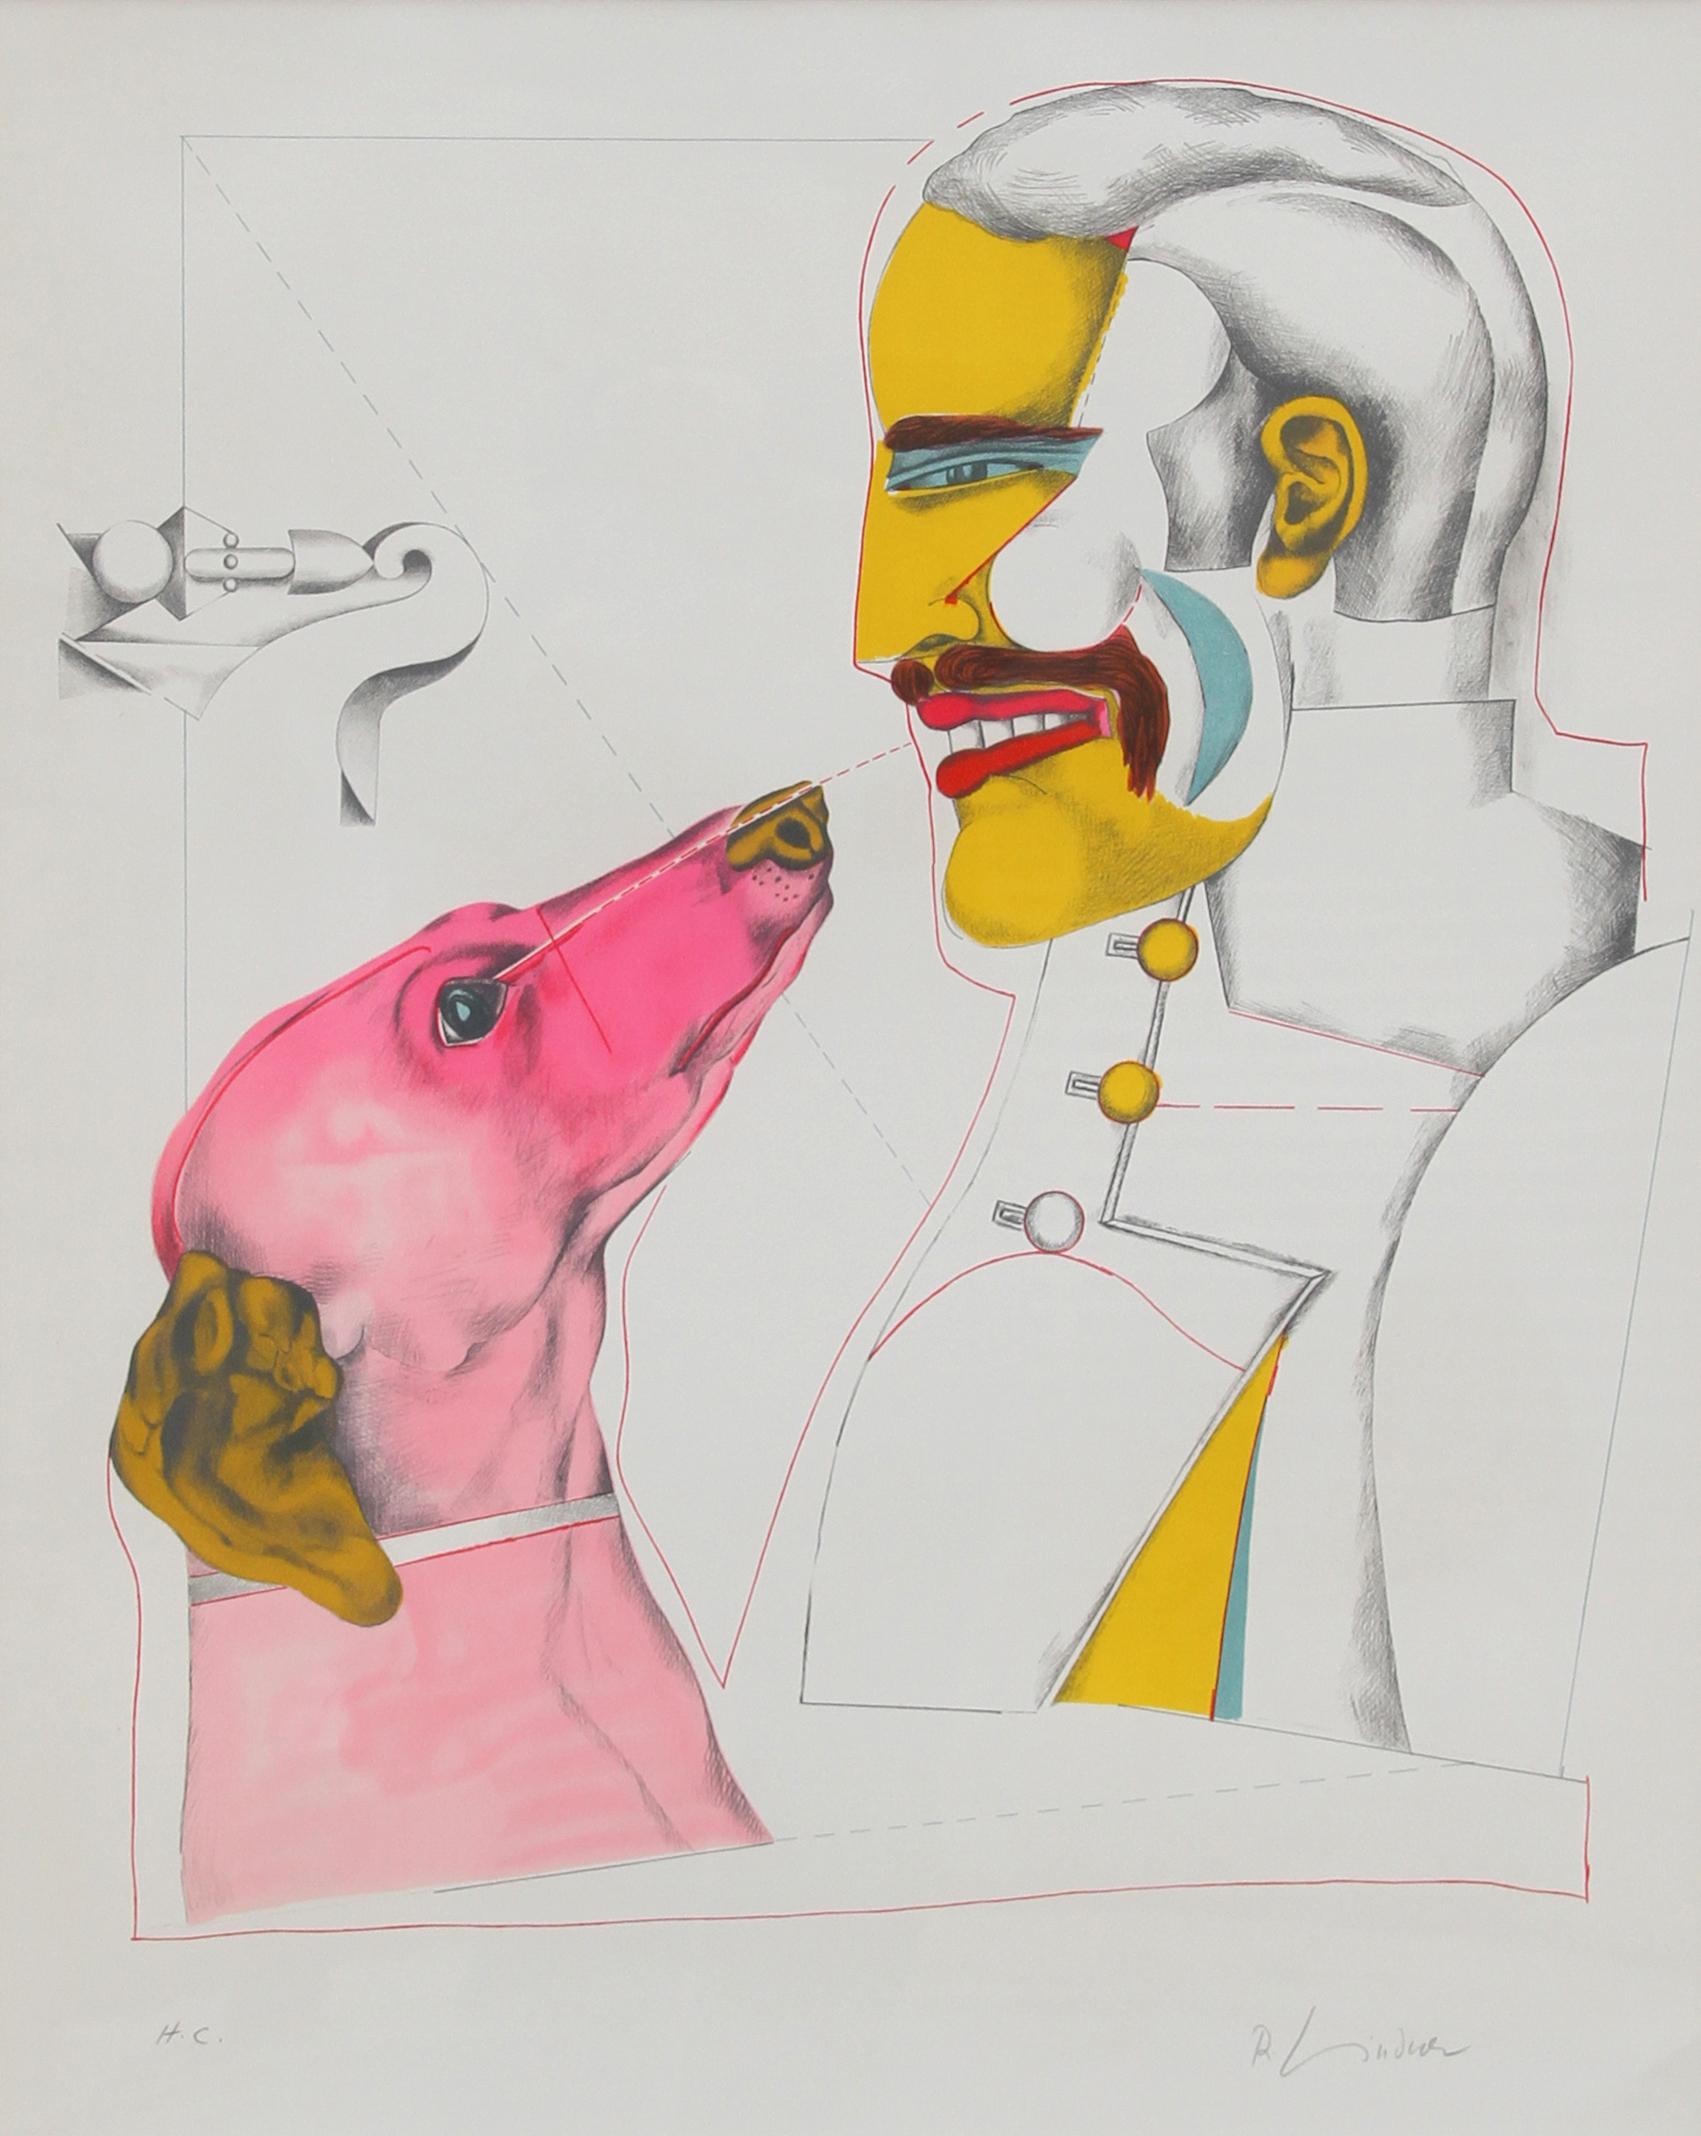 Richard Lindner Figurative Print - Man's Best Friend from the "After Noon" Portfolio